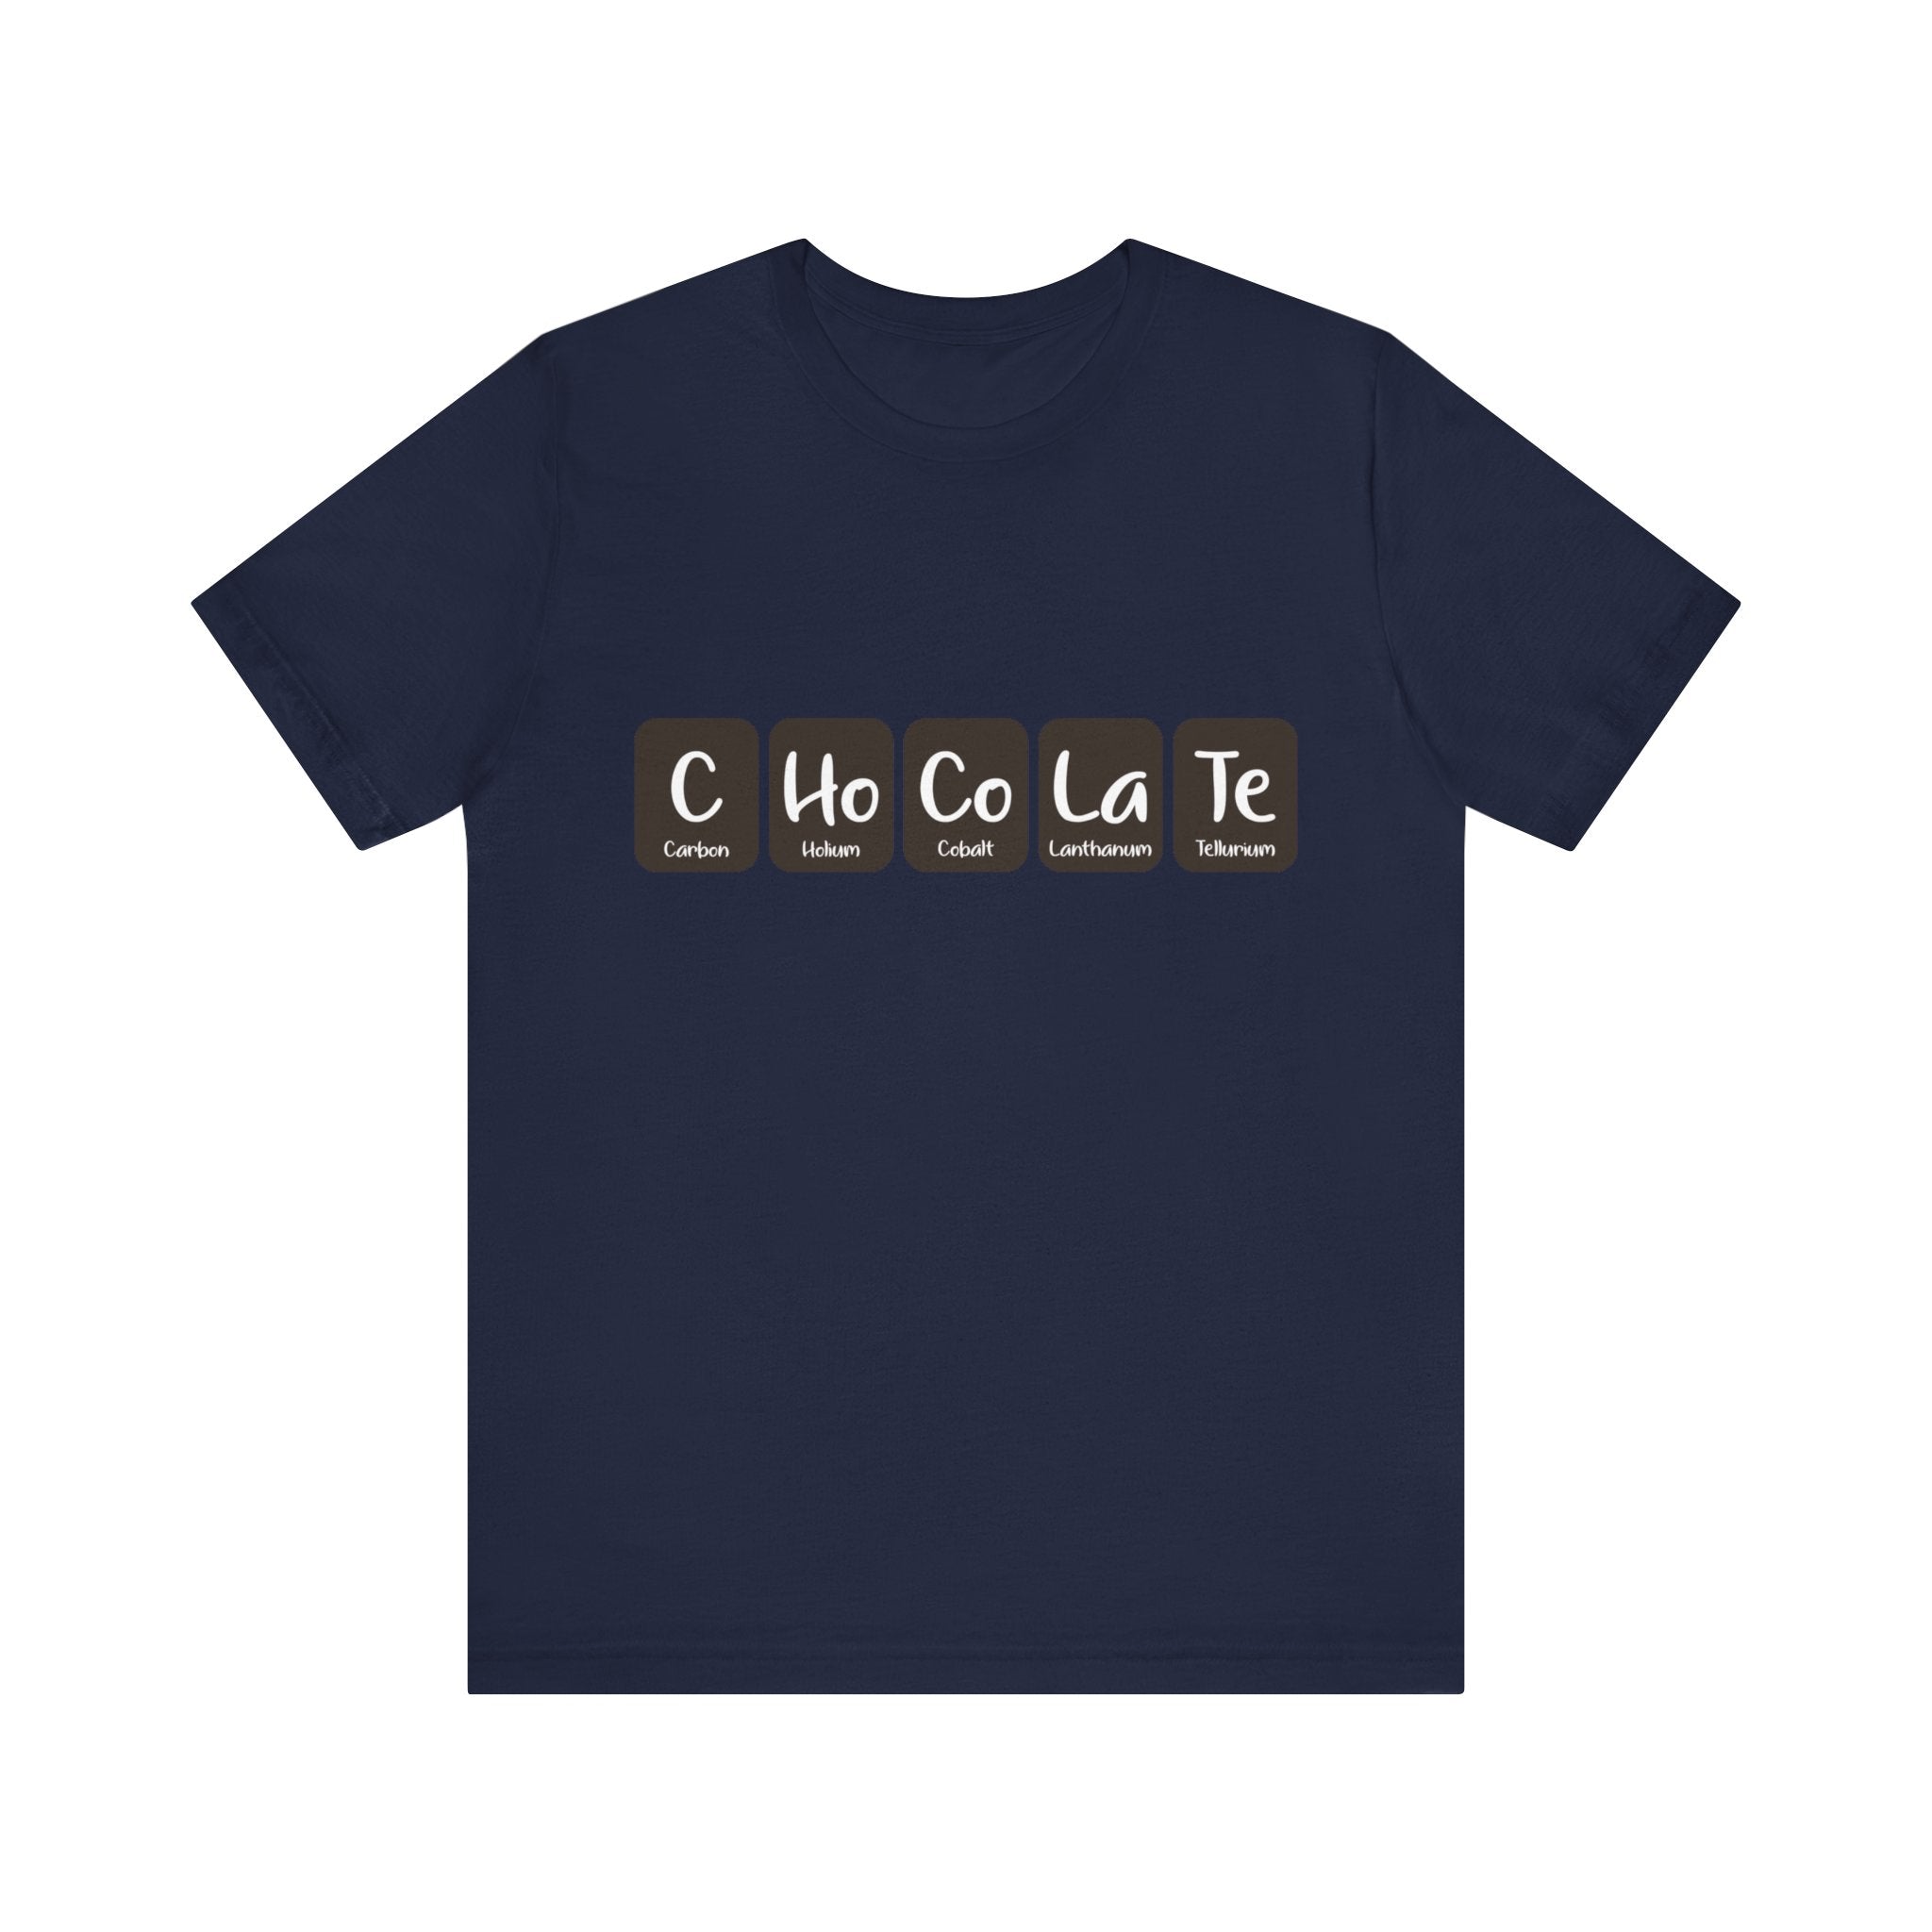 A stylish navy blue C-Ho-Co-La-Te - T-Shirt featuring a clever design using chemical elements abbreviations, crafted from soft Airlume cotton for ultimate comfort.